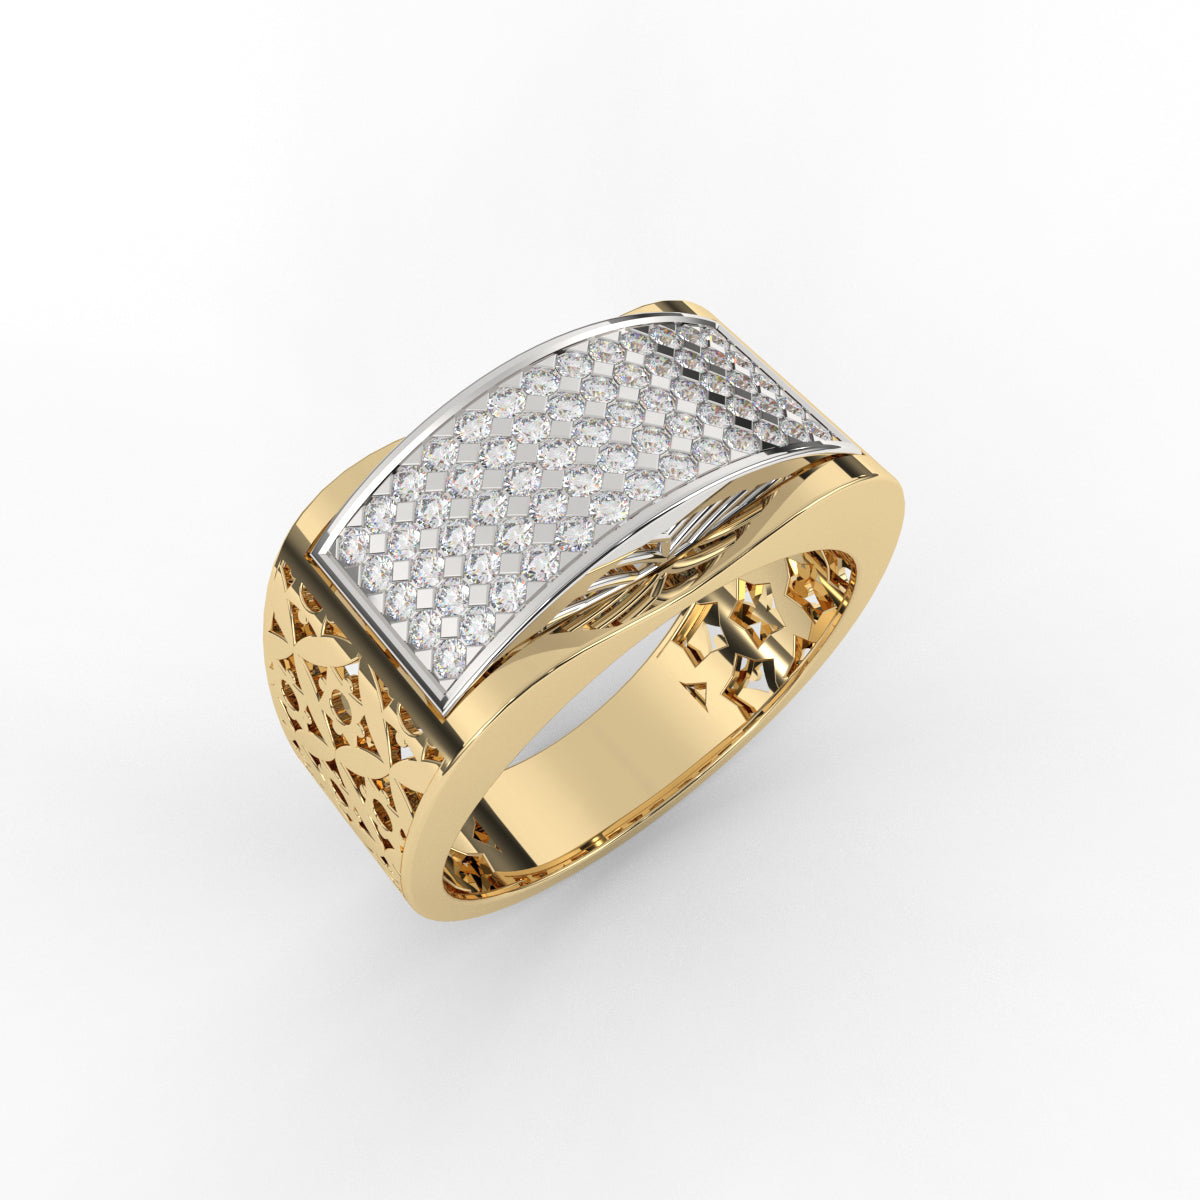 Rings - Buy Rings Online | Gift Delivery in India, USA, UK